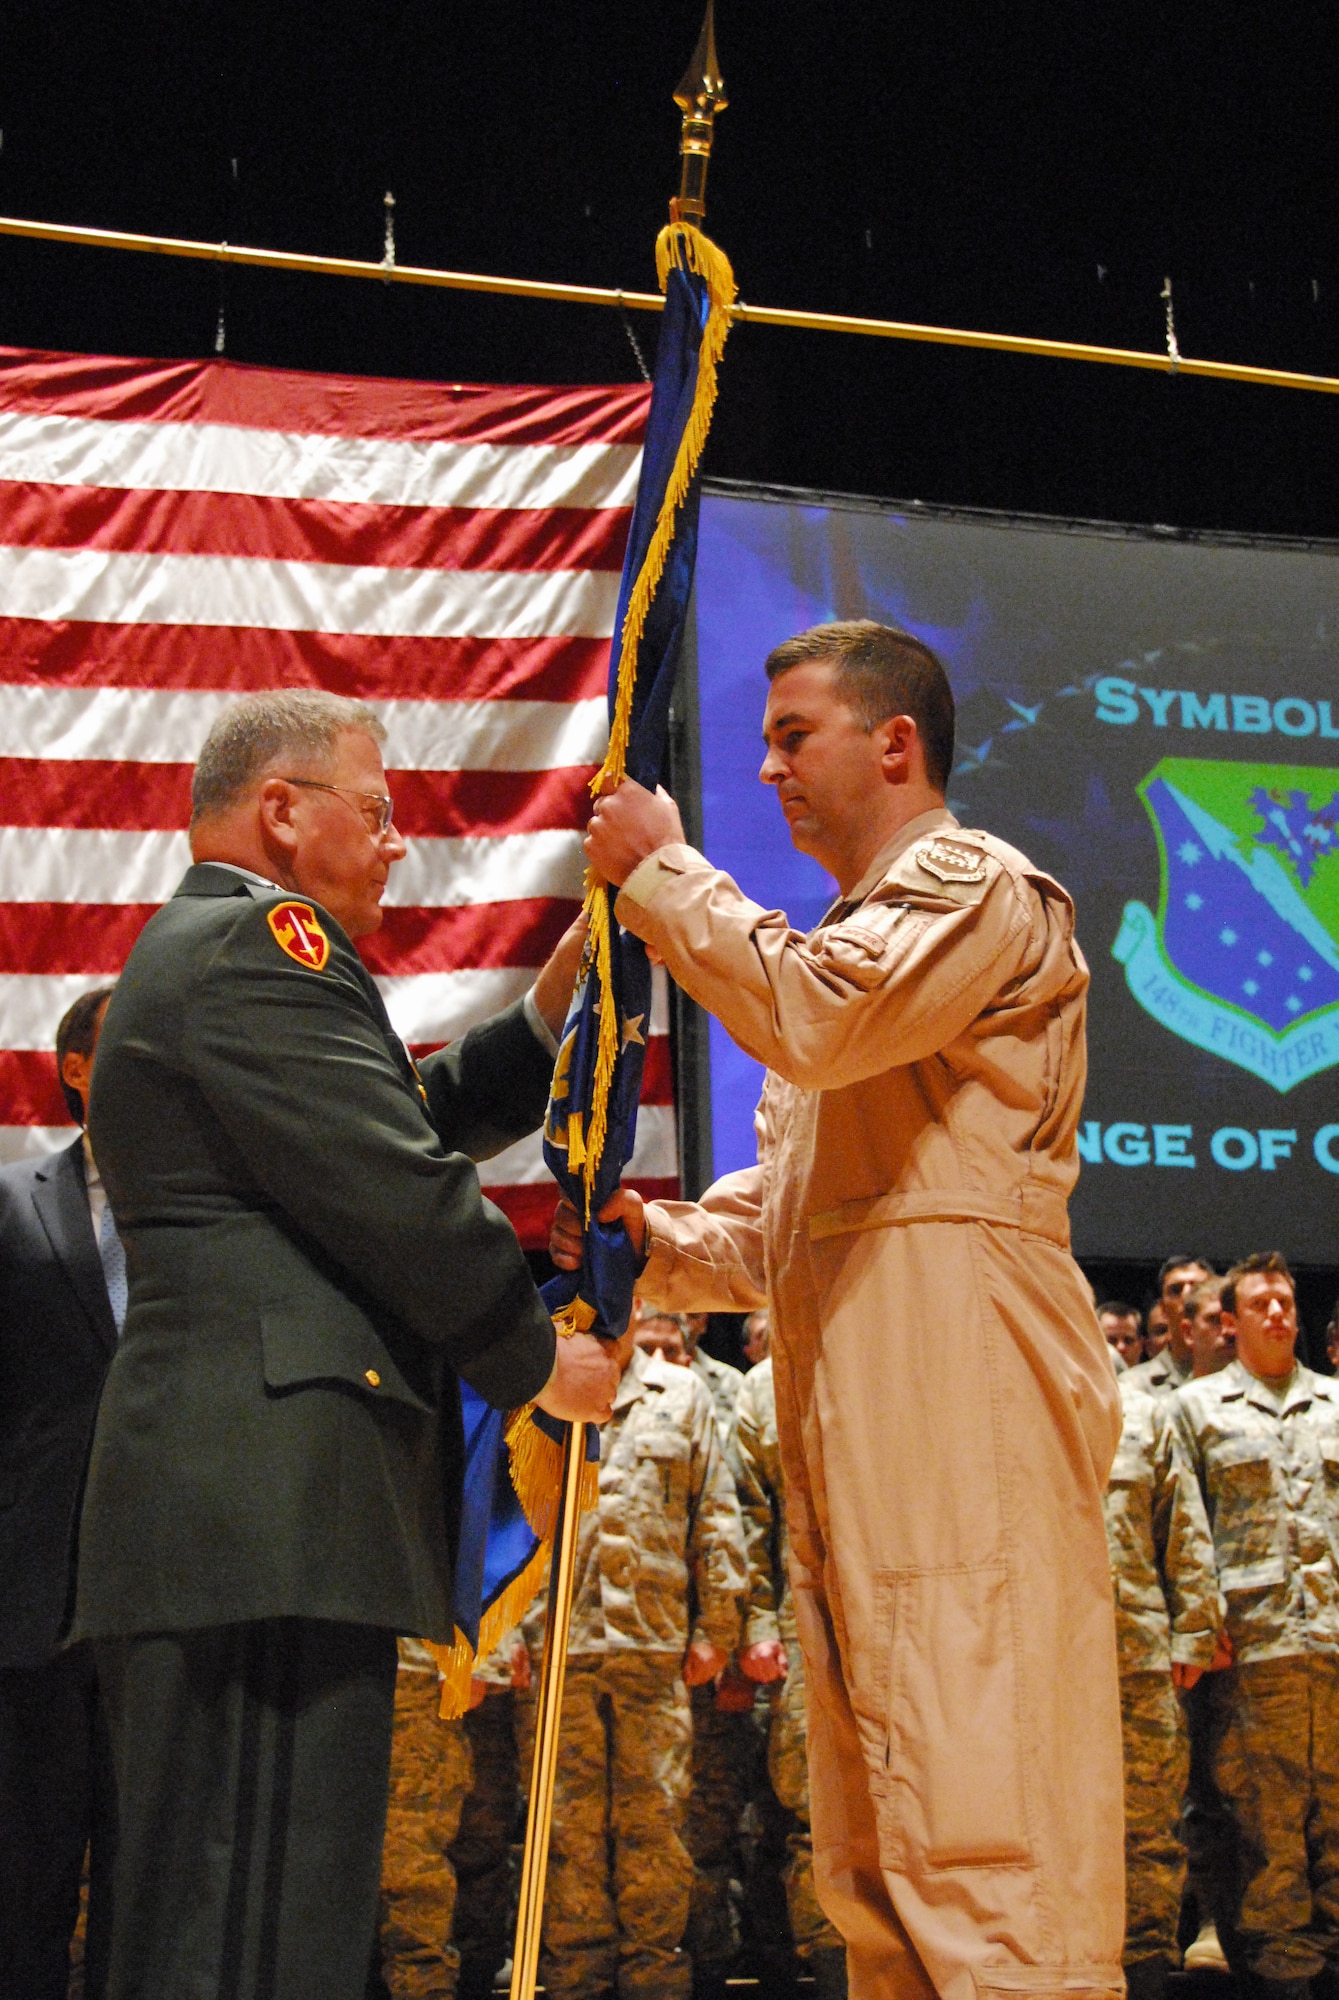 U.S. Army Maj. Gen. Larry Shellito, Adjutant General of the Minnesota National Guard, hands the 148th Fighter Wing's flag to U.S. Air Force Lt. Col. Eric Chandler, 148th Fighter Wing pilot, signifying a change in command for the deploying airmen of the wing during a deployment ceremony in Duluth, Minn. Nov. 2, 2008.  Approximately 300 148th Fighter Wing members will deploy overseas in support of Operation Iraqi Freedom and/or Operation Enduring Freedom between Sept 2008 and Jan 2009. (U.S. Air Force photo by TSgt Amie Dahl) (Released)